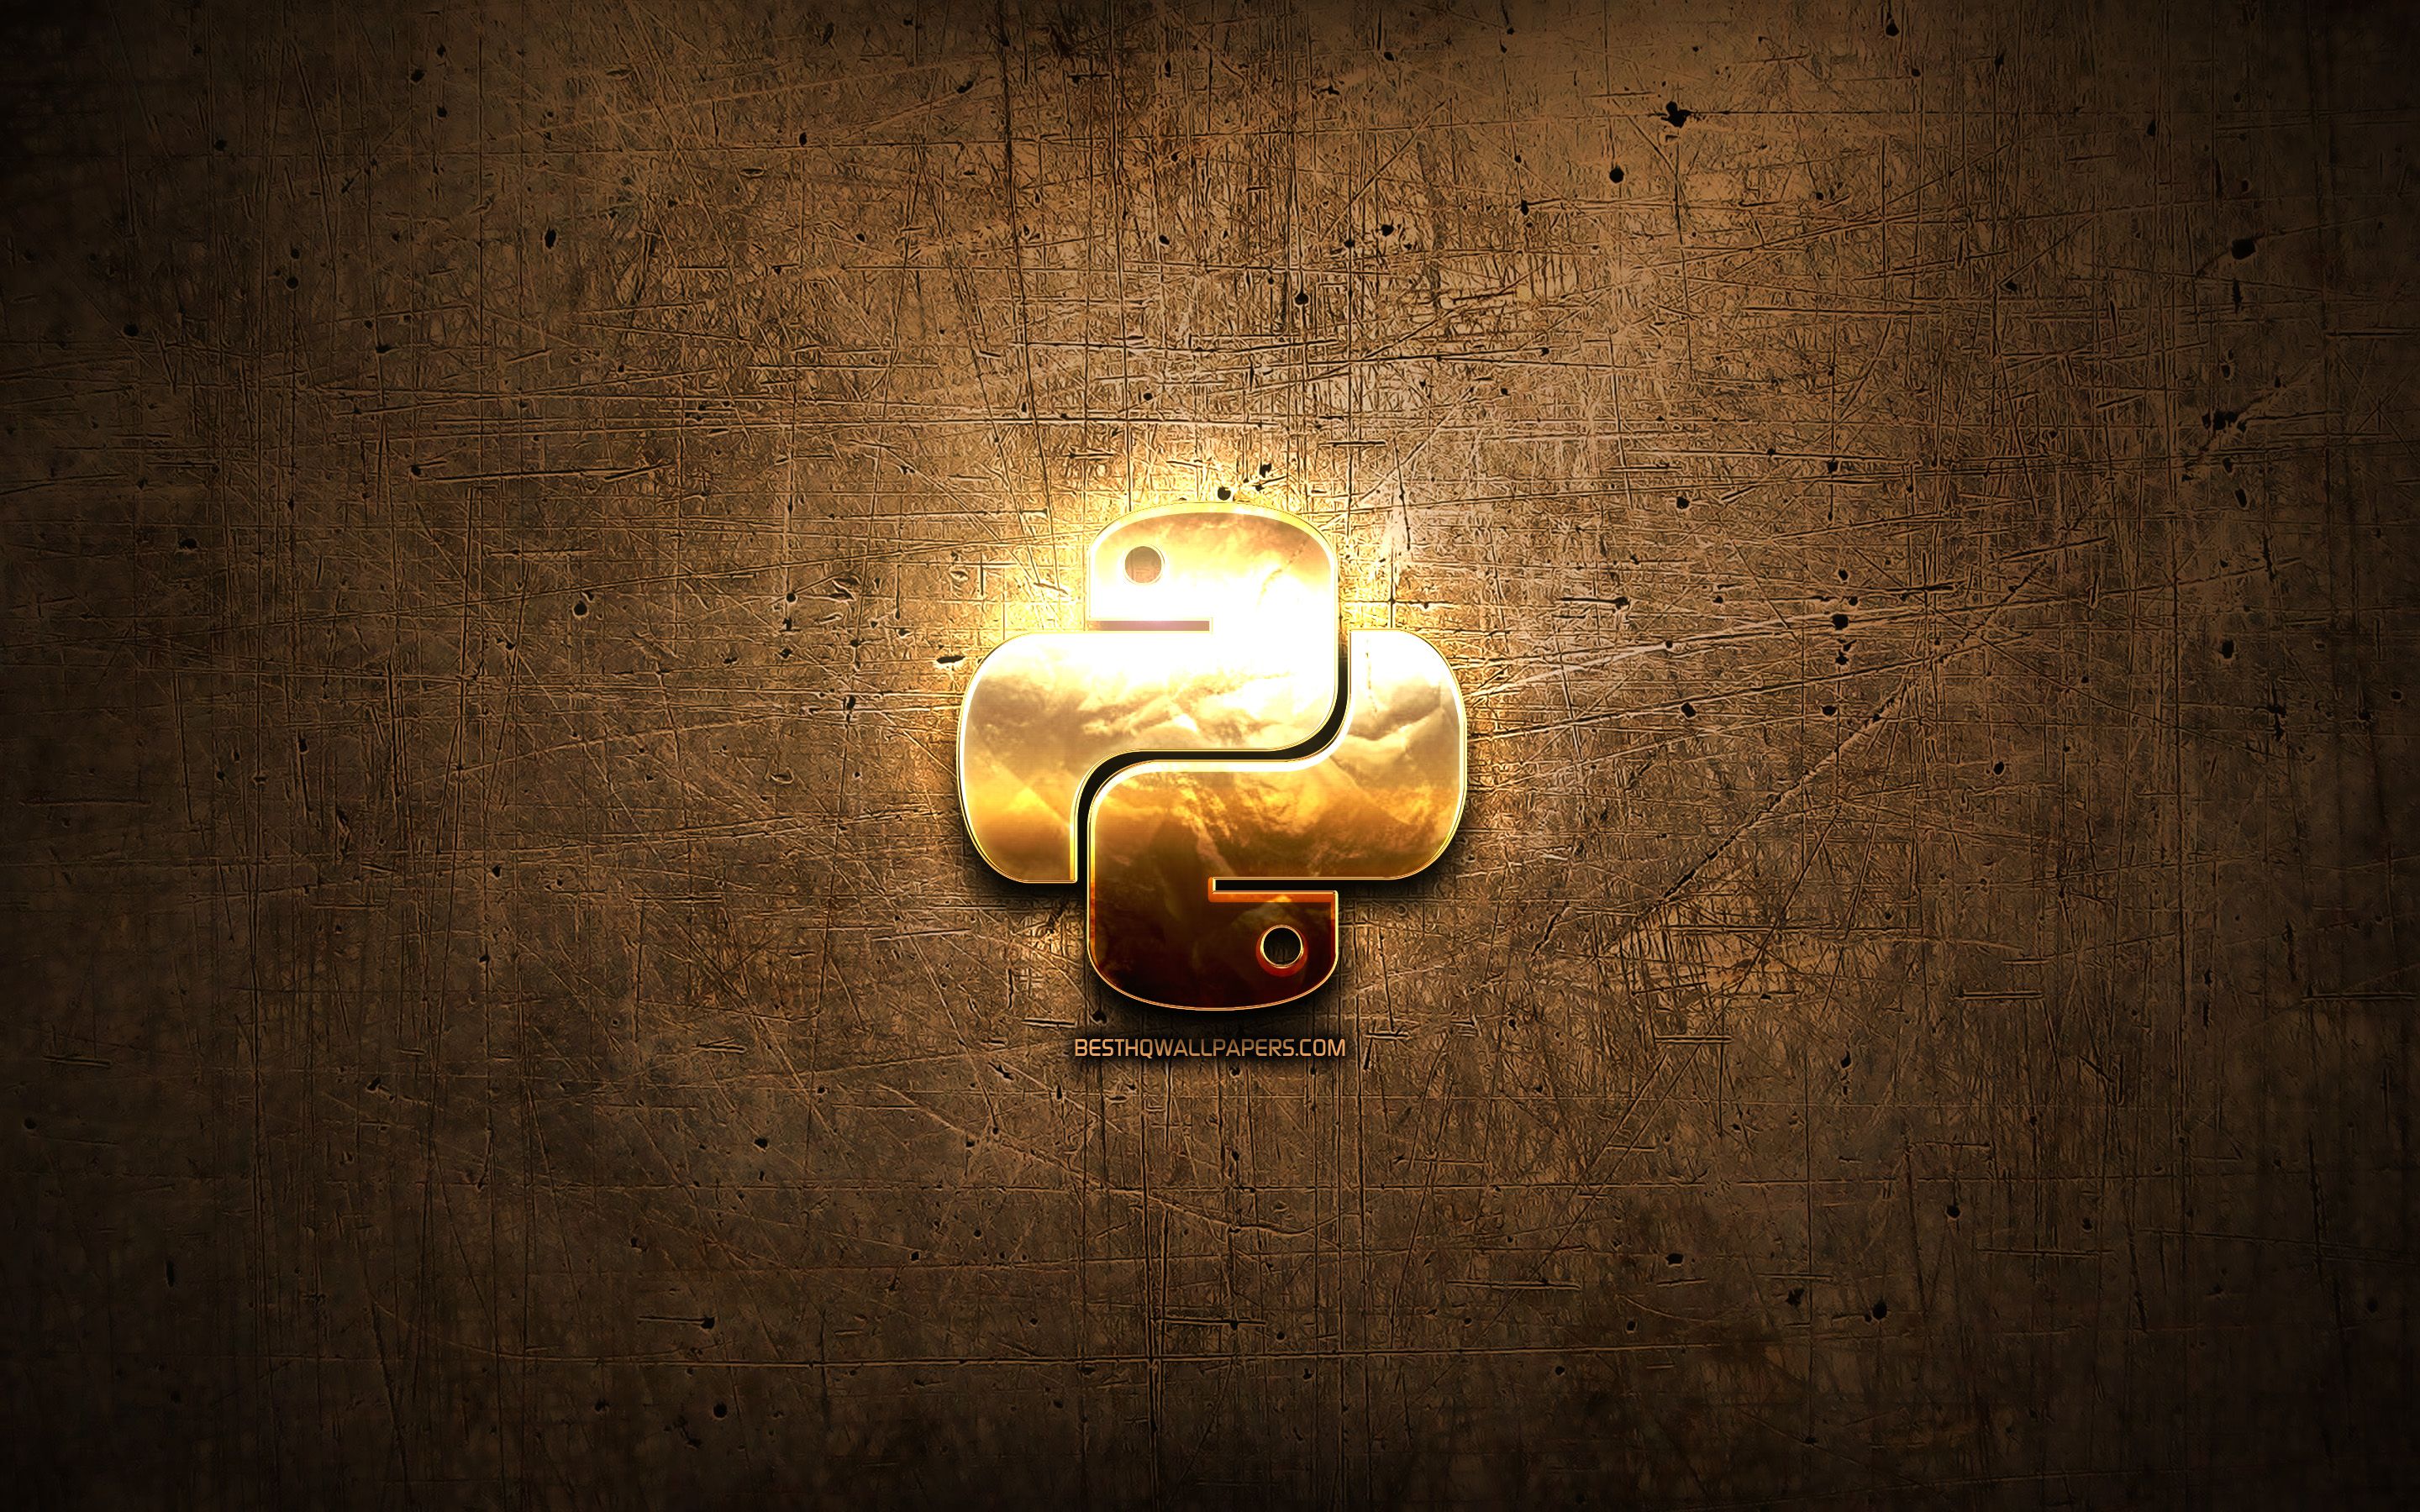 Download wallpaper Python golden logo, programming language, brown metal background, creative, Python logo, programming language signs, Python for desktop with resolution 2880x1800. High Quality HD picture wallpaper